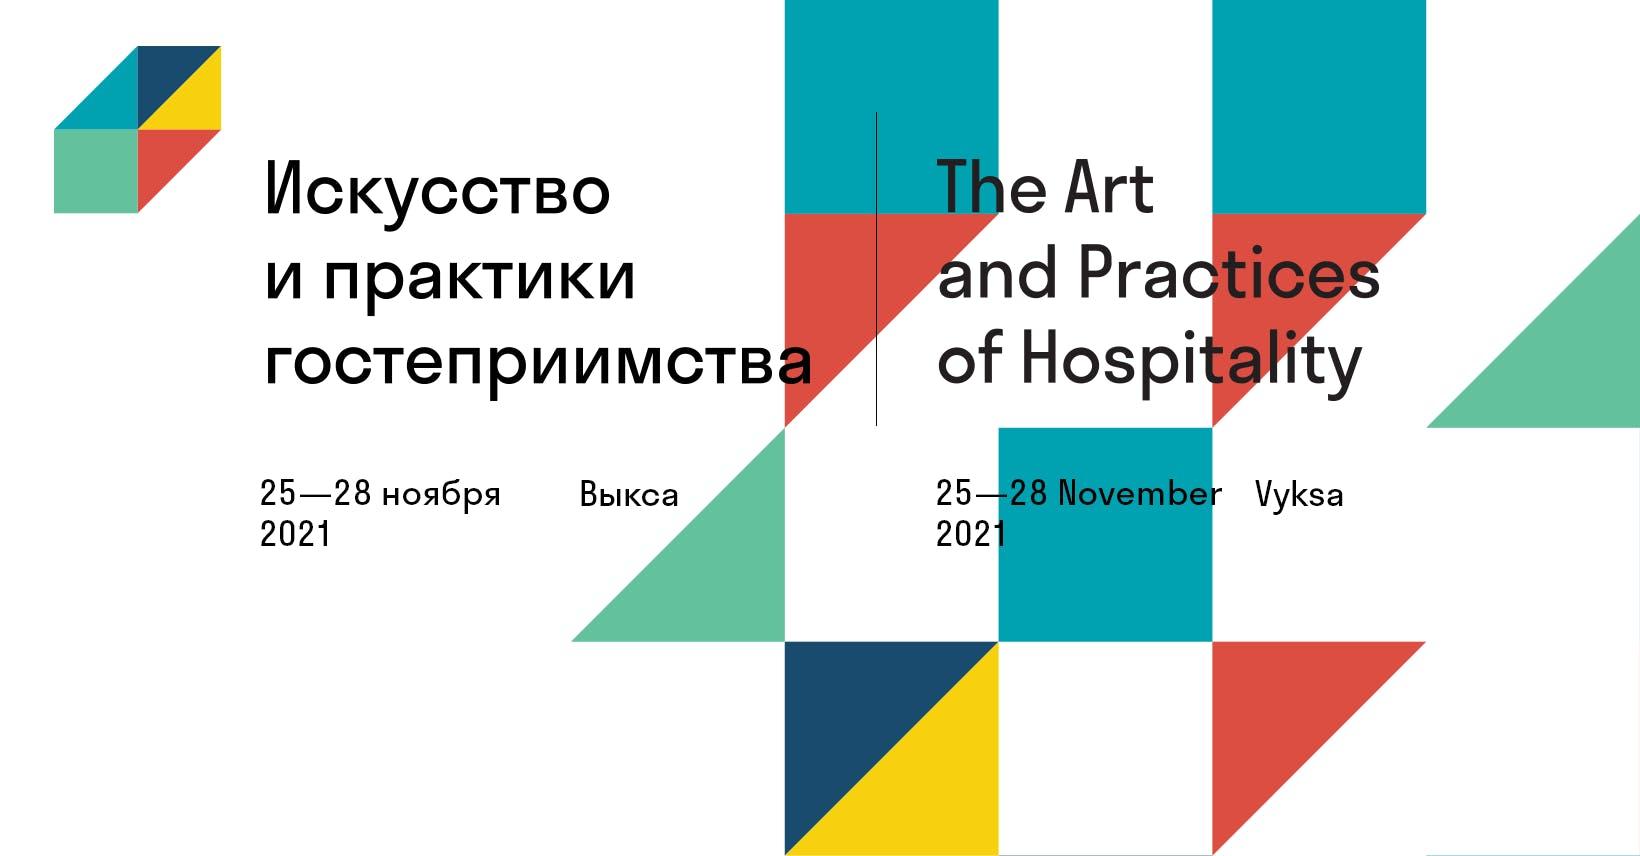 International conference “The Art and Practices of Hospitality”